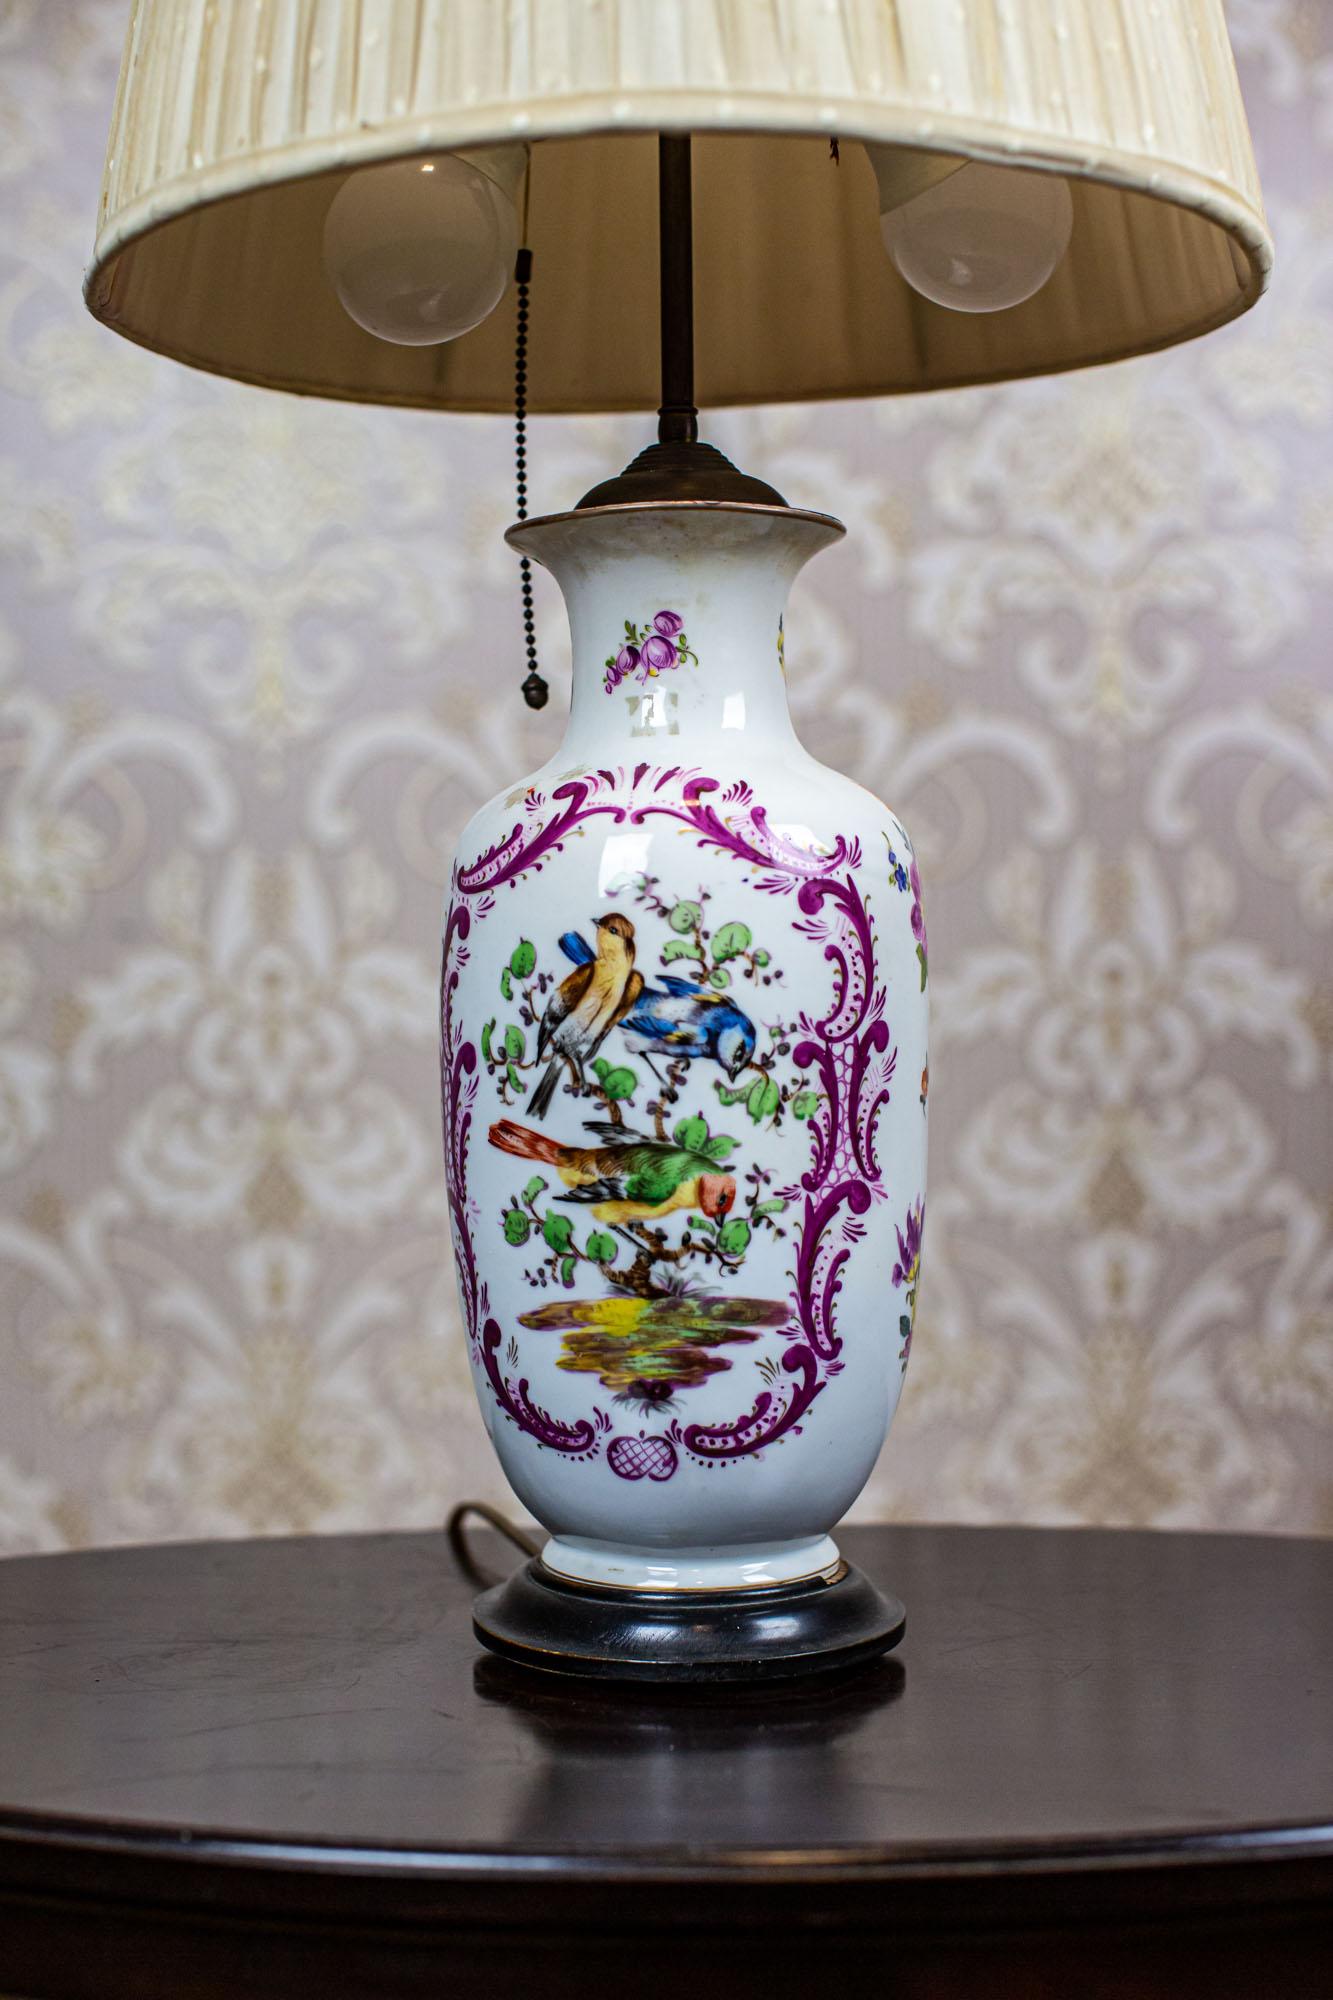 20th-Century Electric Table Lamp with Decorative Ceramic Base In Good Condition For Sale In Opole, PL